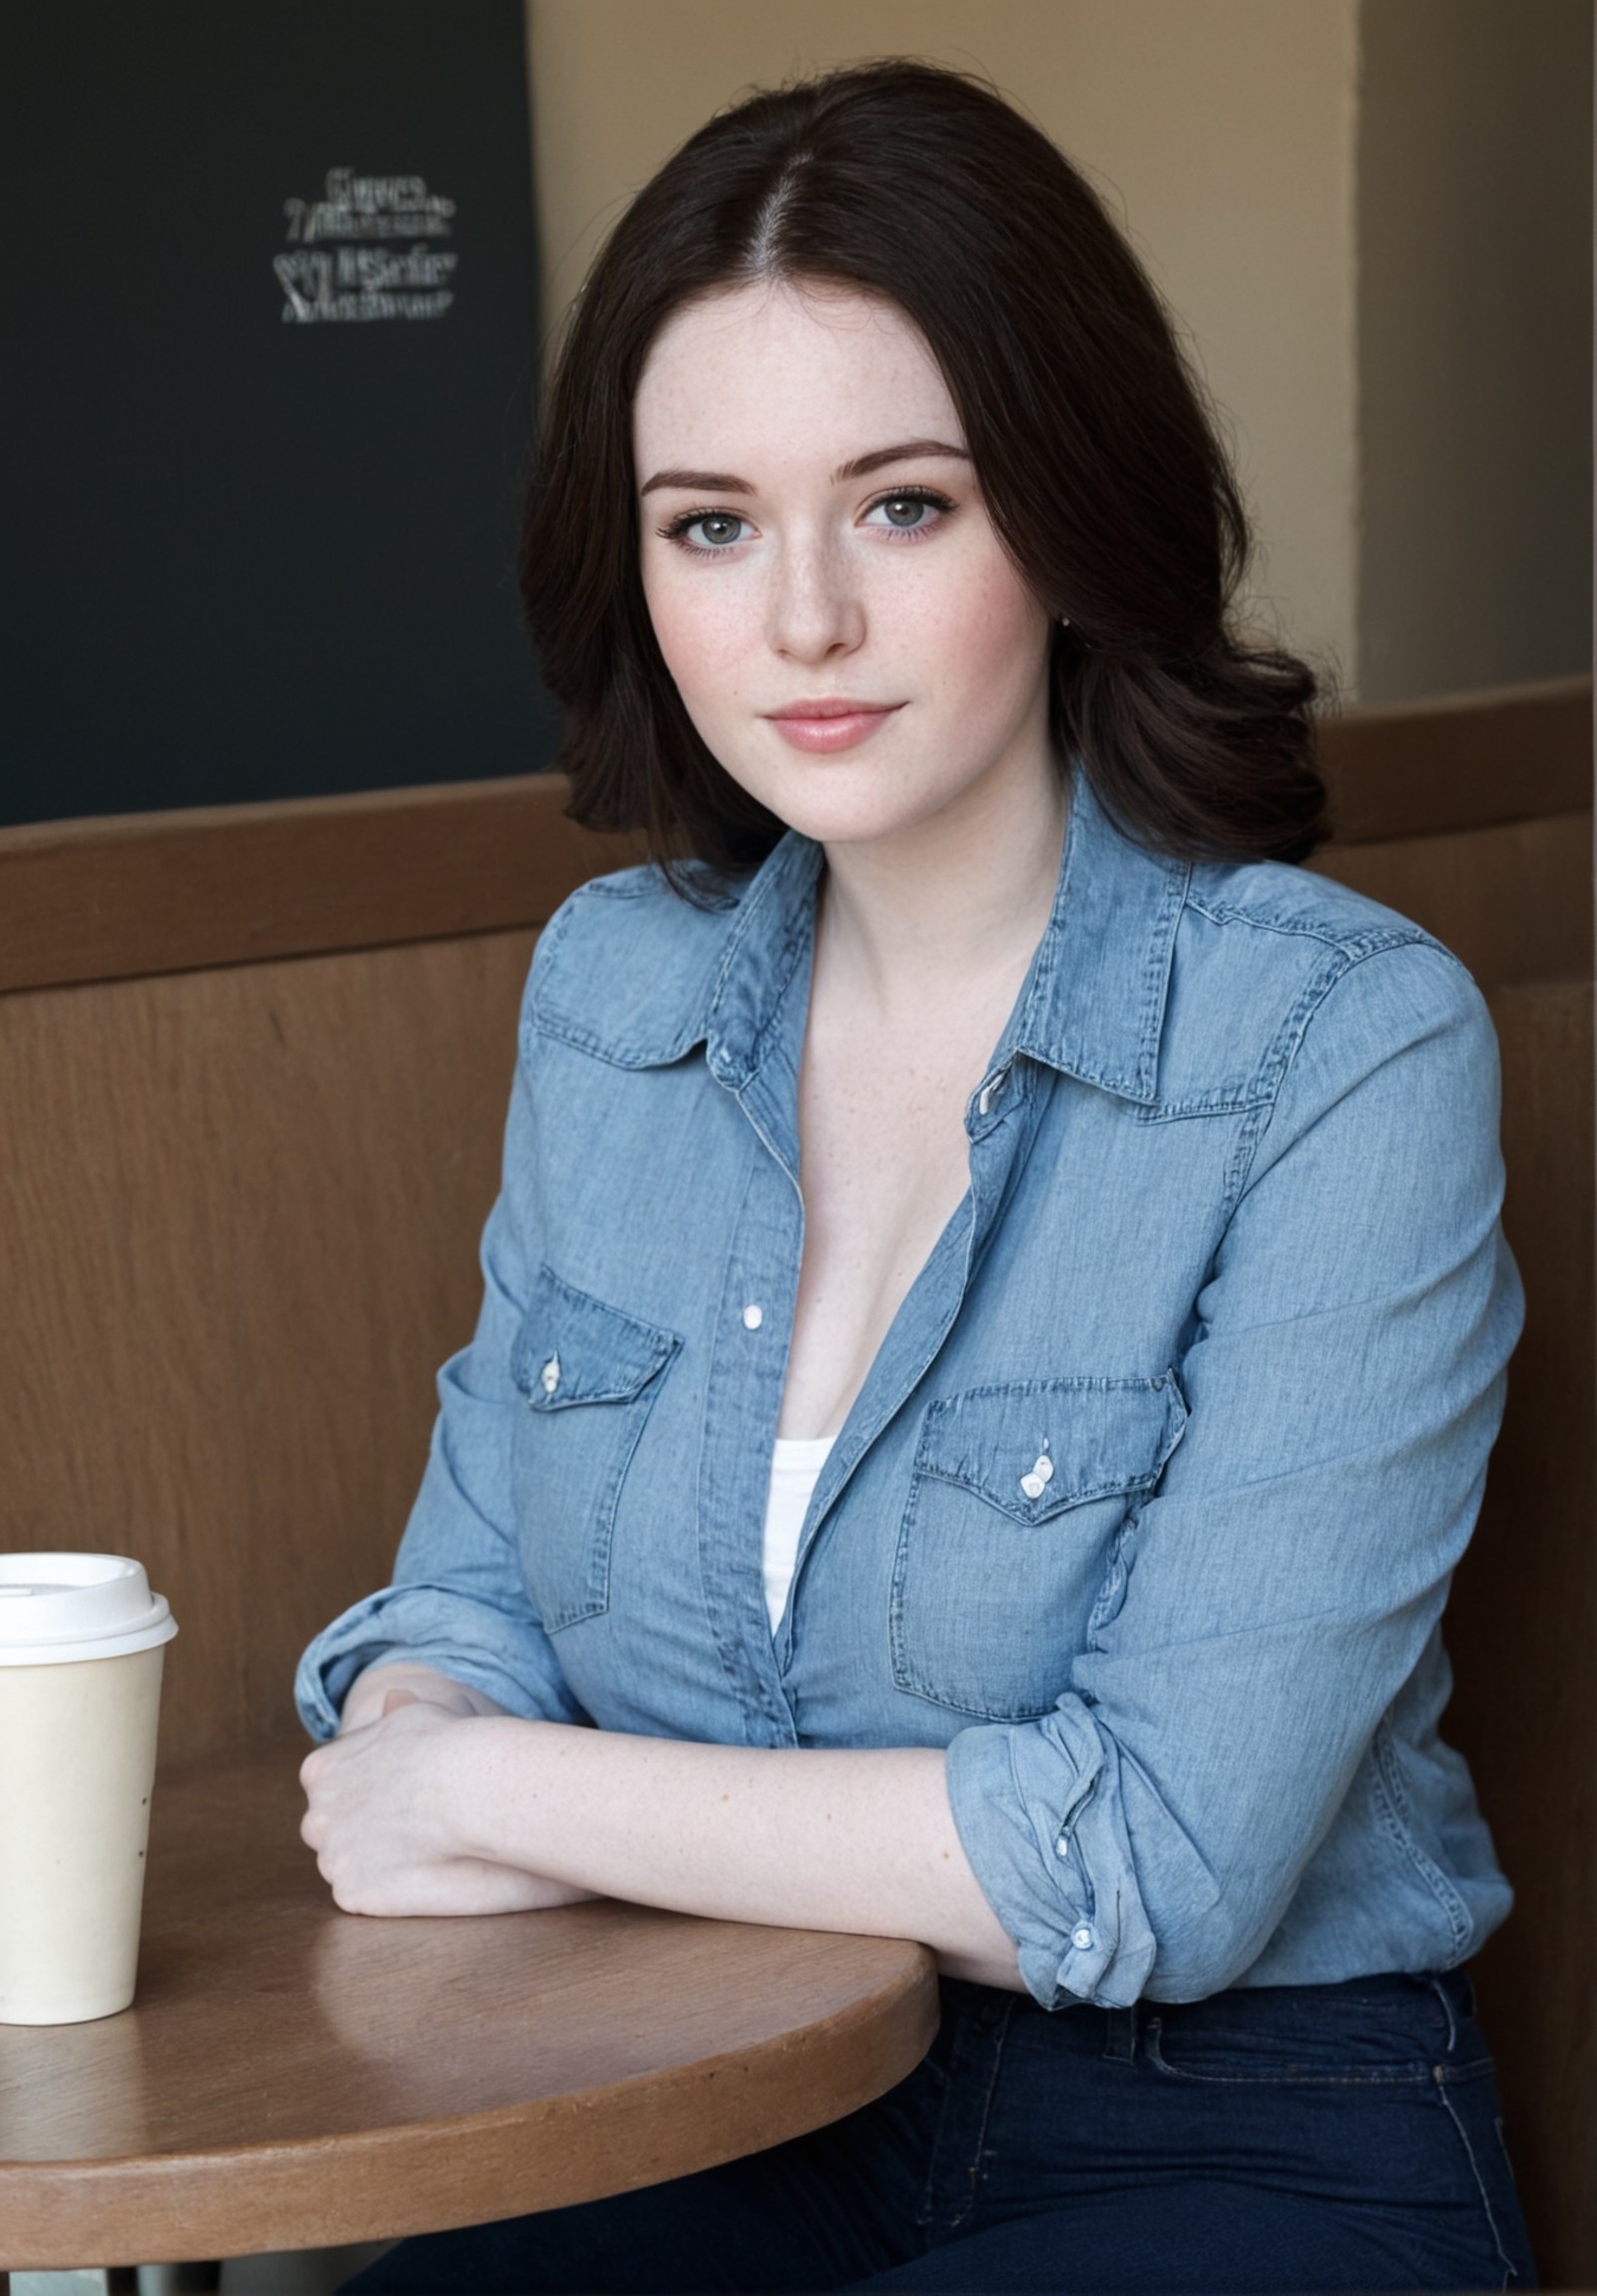 pale, pale skin, (freckles:0.4), woman sitting in a cafe,  jeans and shirt, large breasts, slim, young woman, early 20s, d...